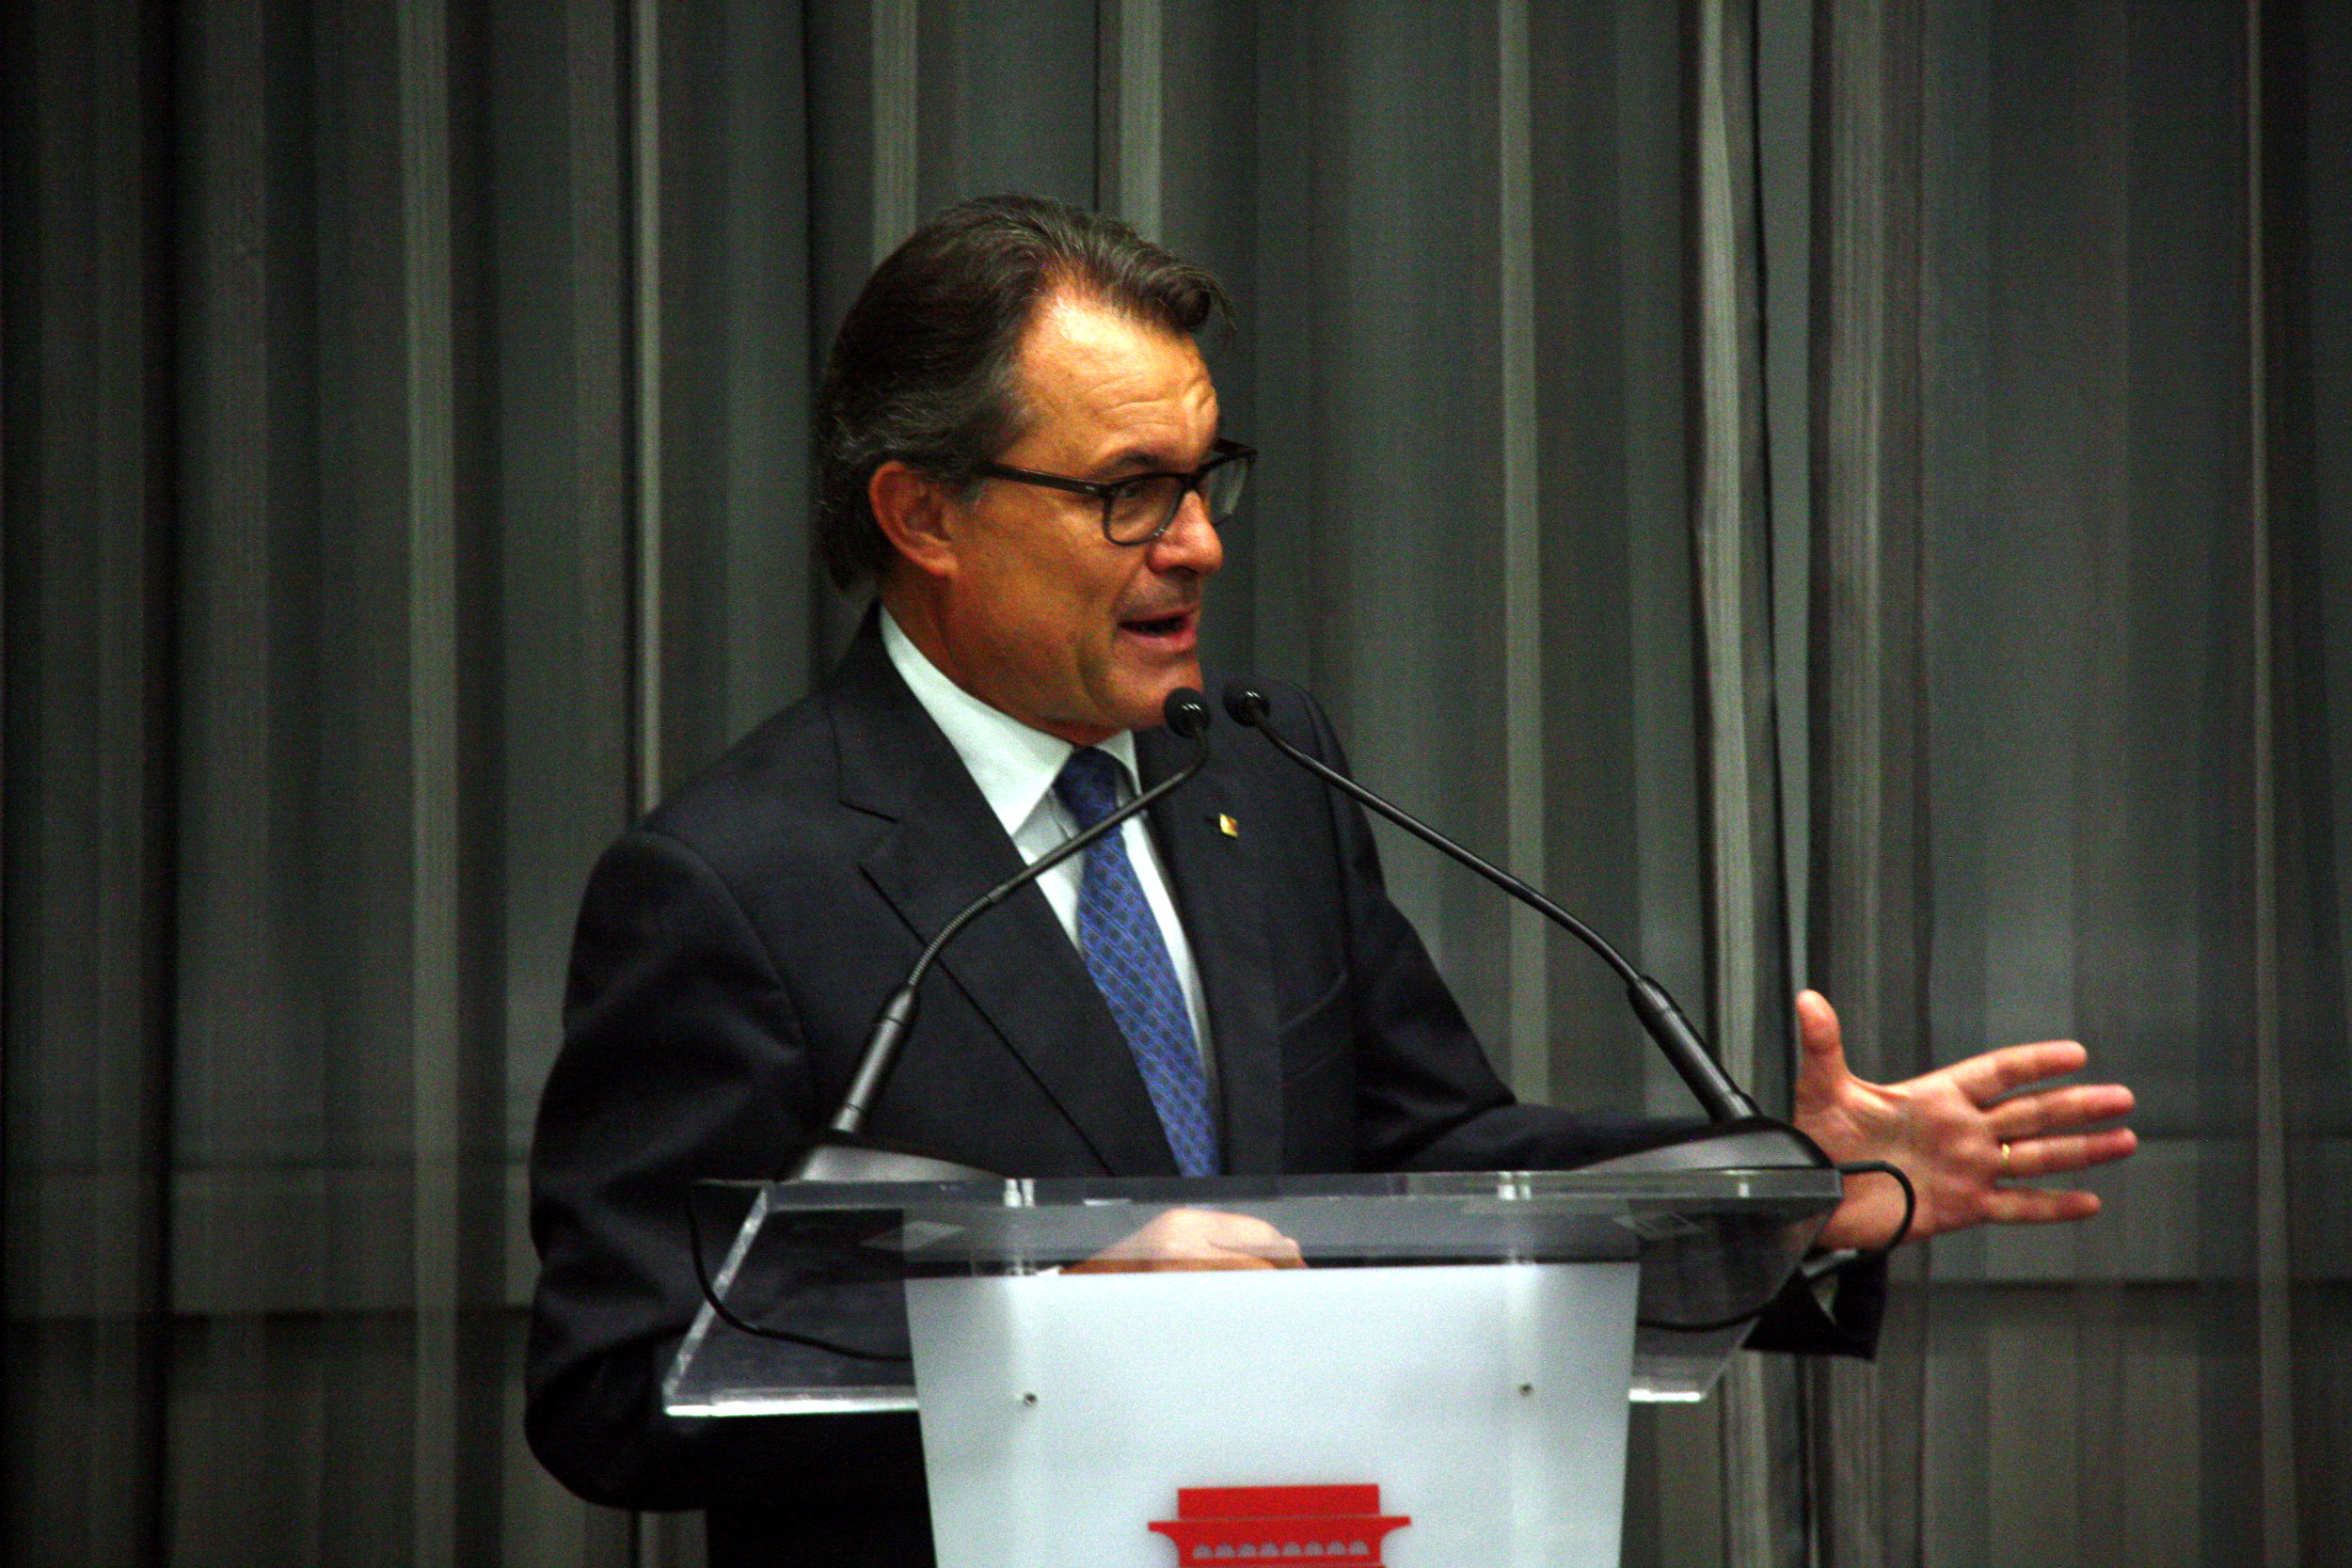 President Mas at a dinner with employer's association in Girona (by ACN)